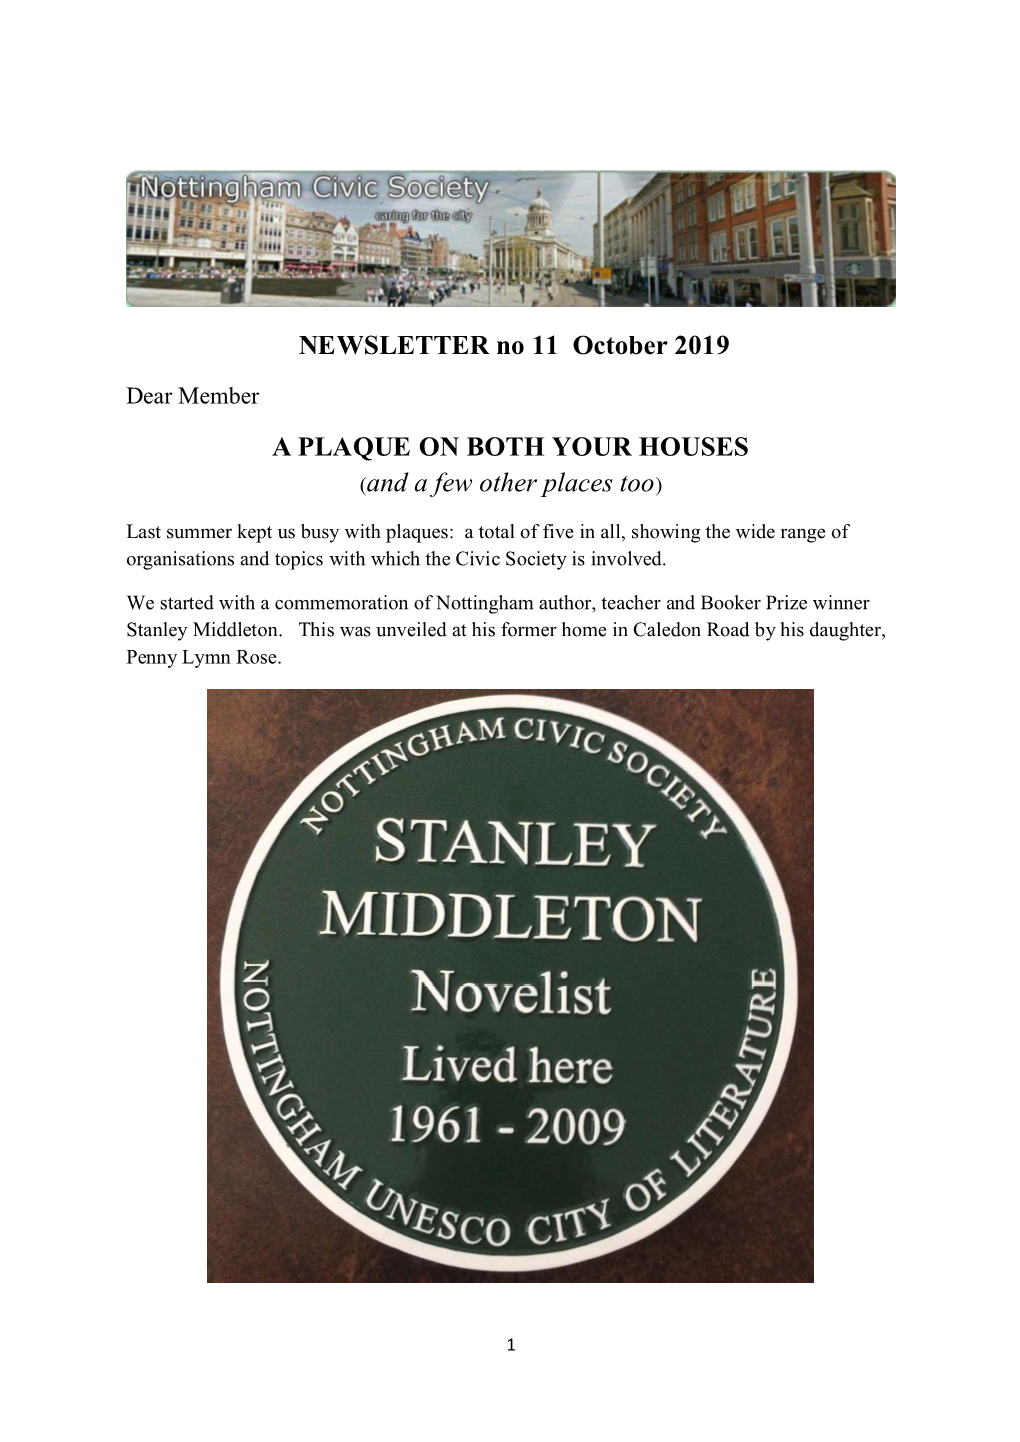 NEWSLETTER No 11 October 2019 a PLAQUE on BOTH YOUR HOUSES